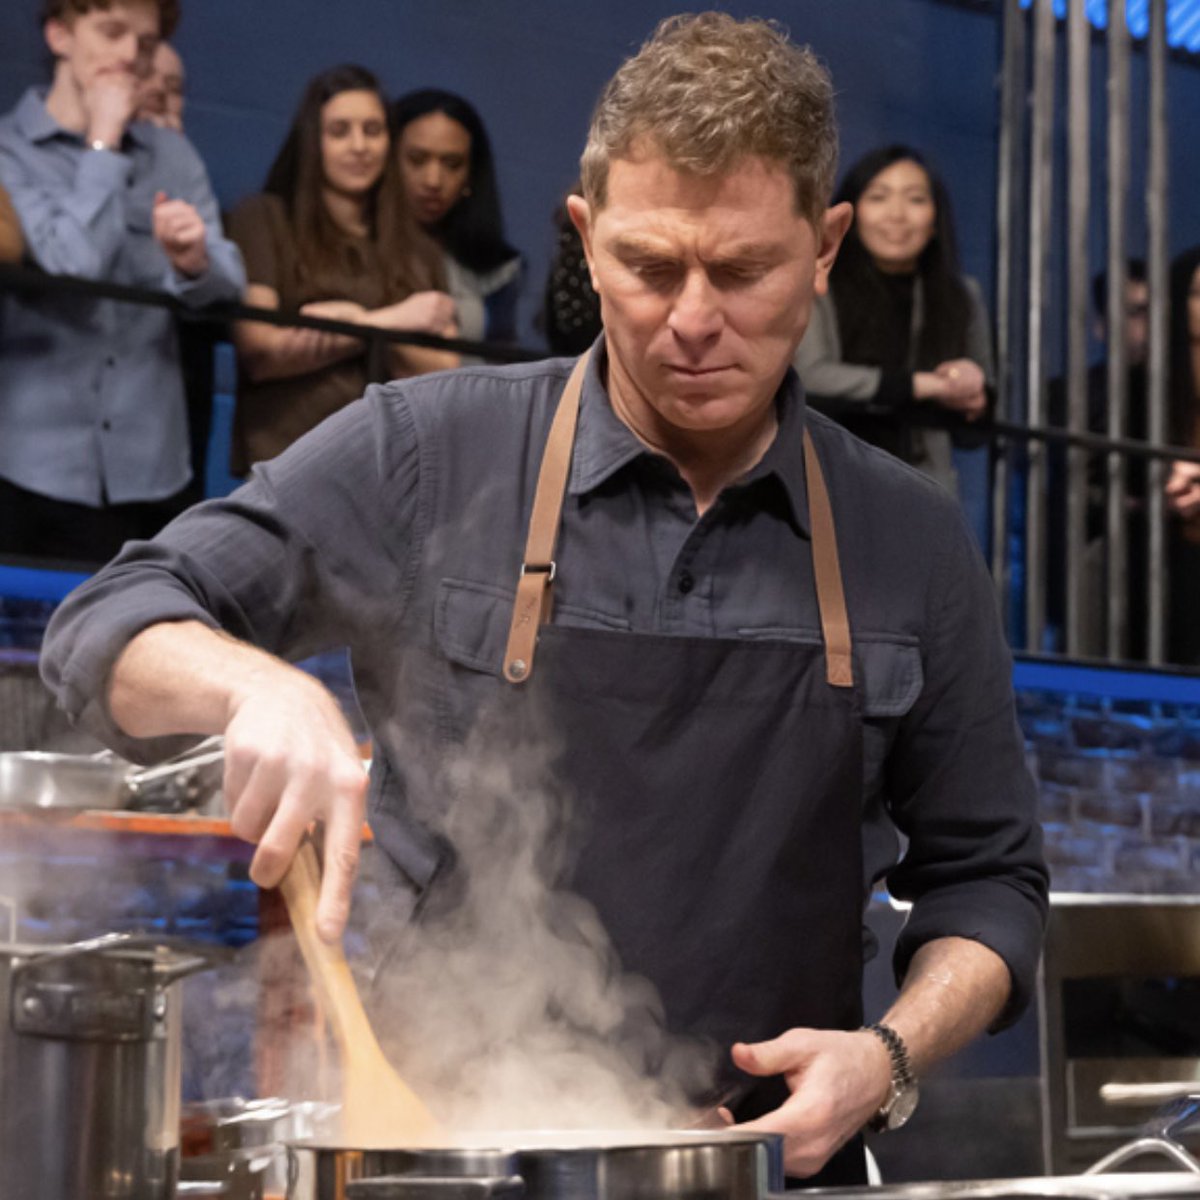 Coming up TONIGHT…don’t miss NEW #BeatBobbyFlay at 9pm ET on @FoodNetwork